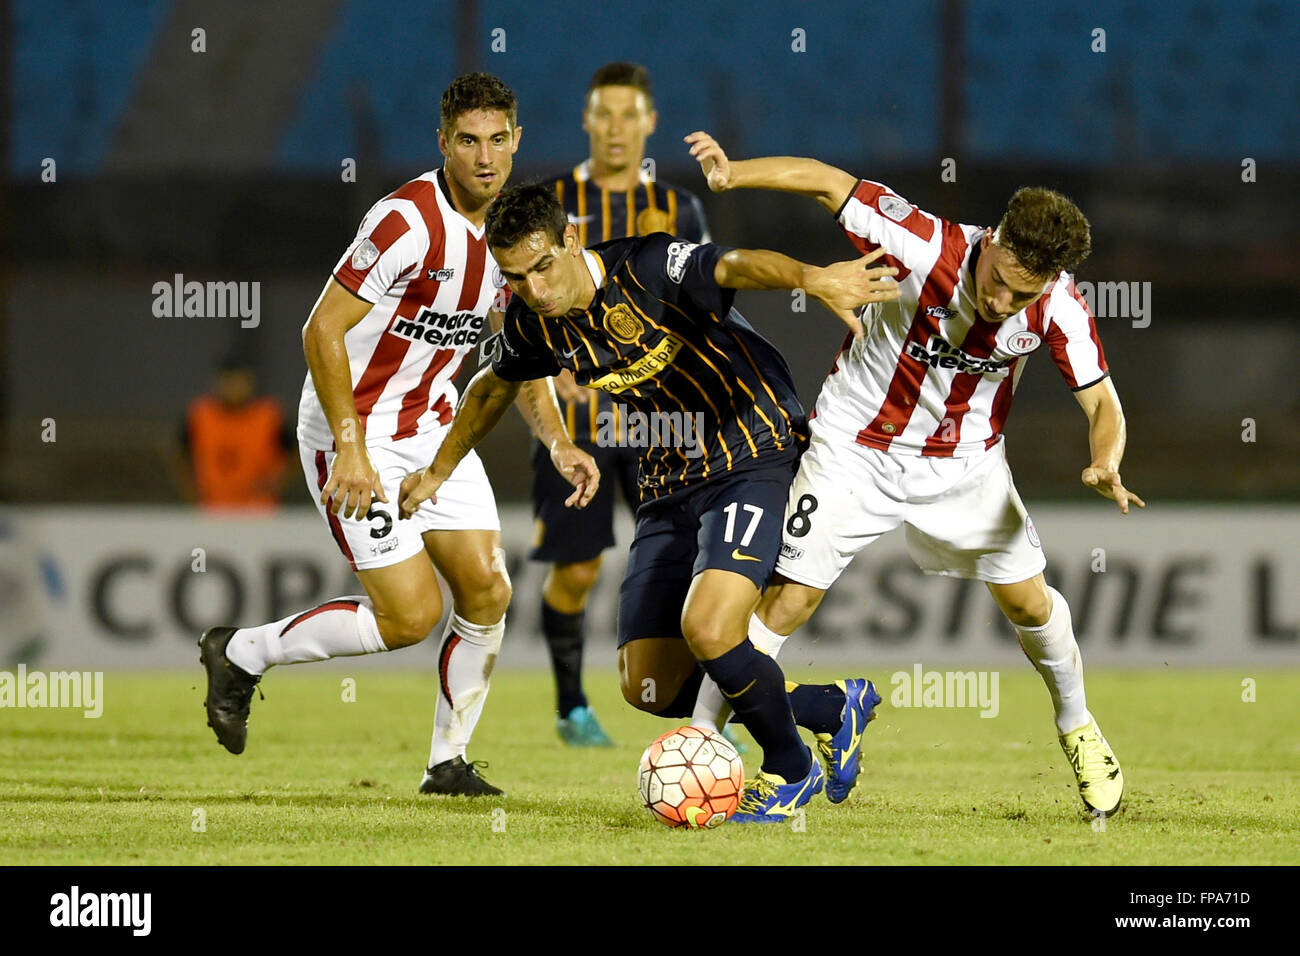 Montevideo, Uruguay. 17th Mar, 2106. Fernando Gorriaran (R) of Uruguay's River Plate vies for the ball with German Herrera (L) of Argentina's Rosario Central, during the Group 2 match of the Libertadores Cup, held at Centenario Stadium in Montevideo, capital of Uruguay, on March 17, 2106. Rosario Central won by 3-1. © Nicolas Celaya/Xinhua/Alamy Live News Stock Photo